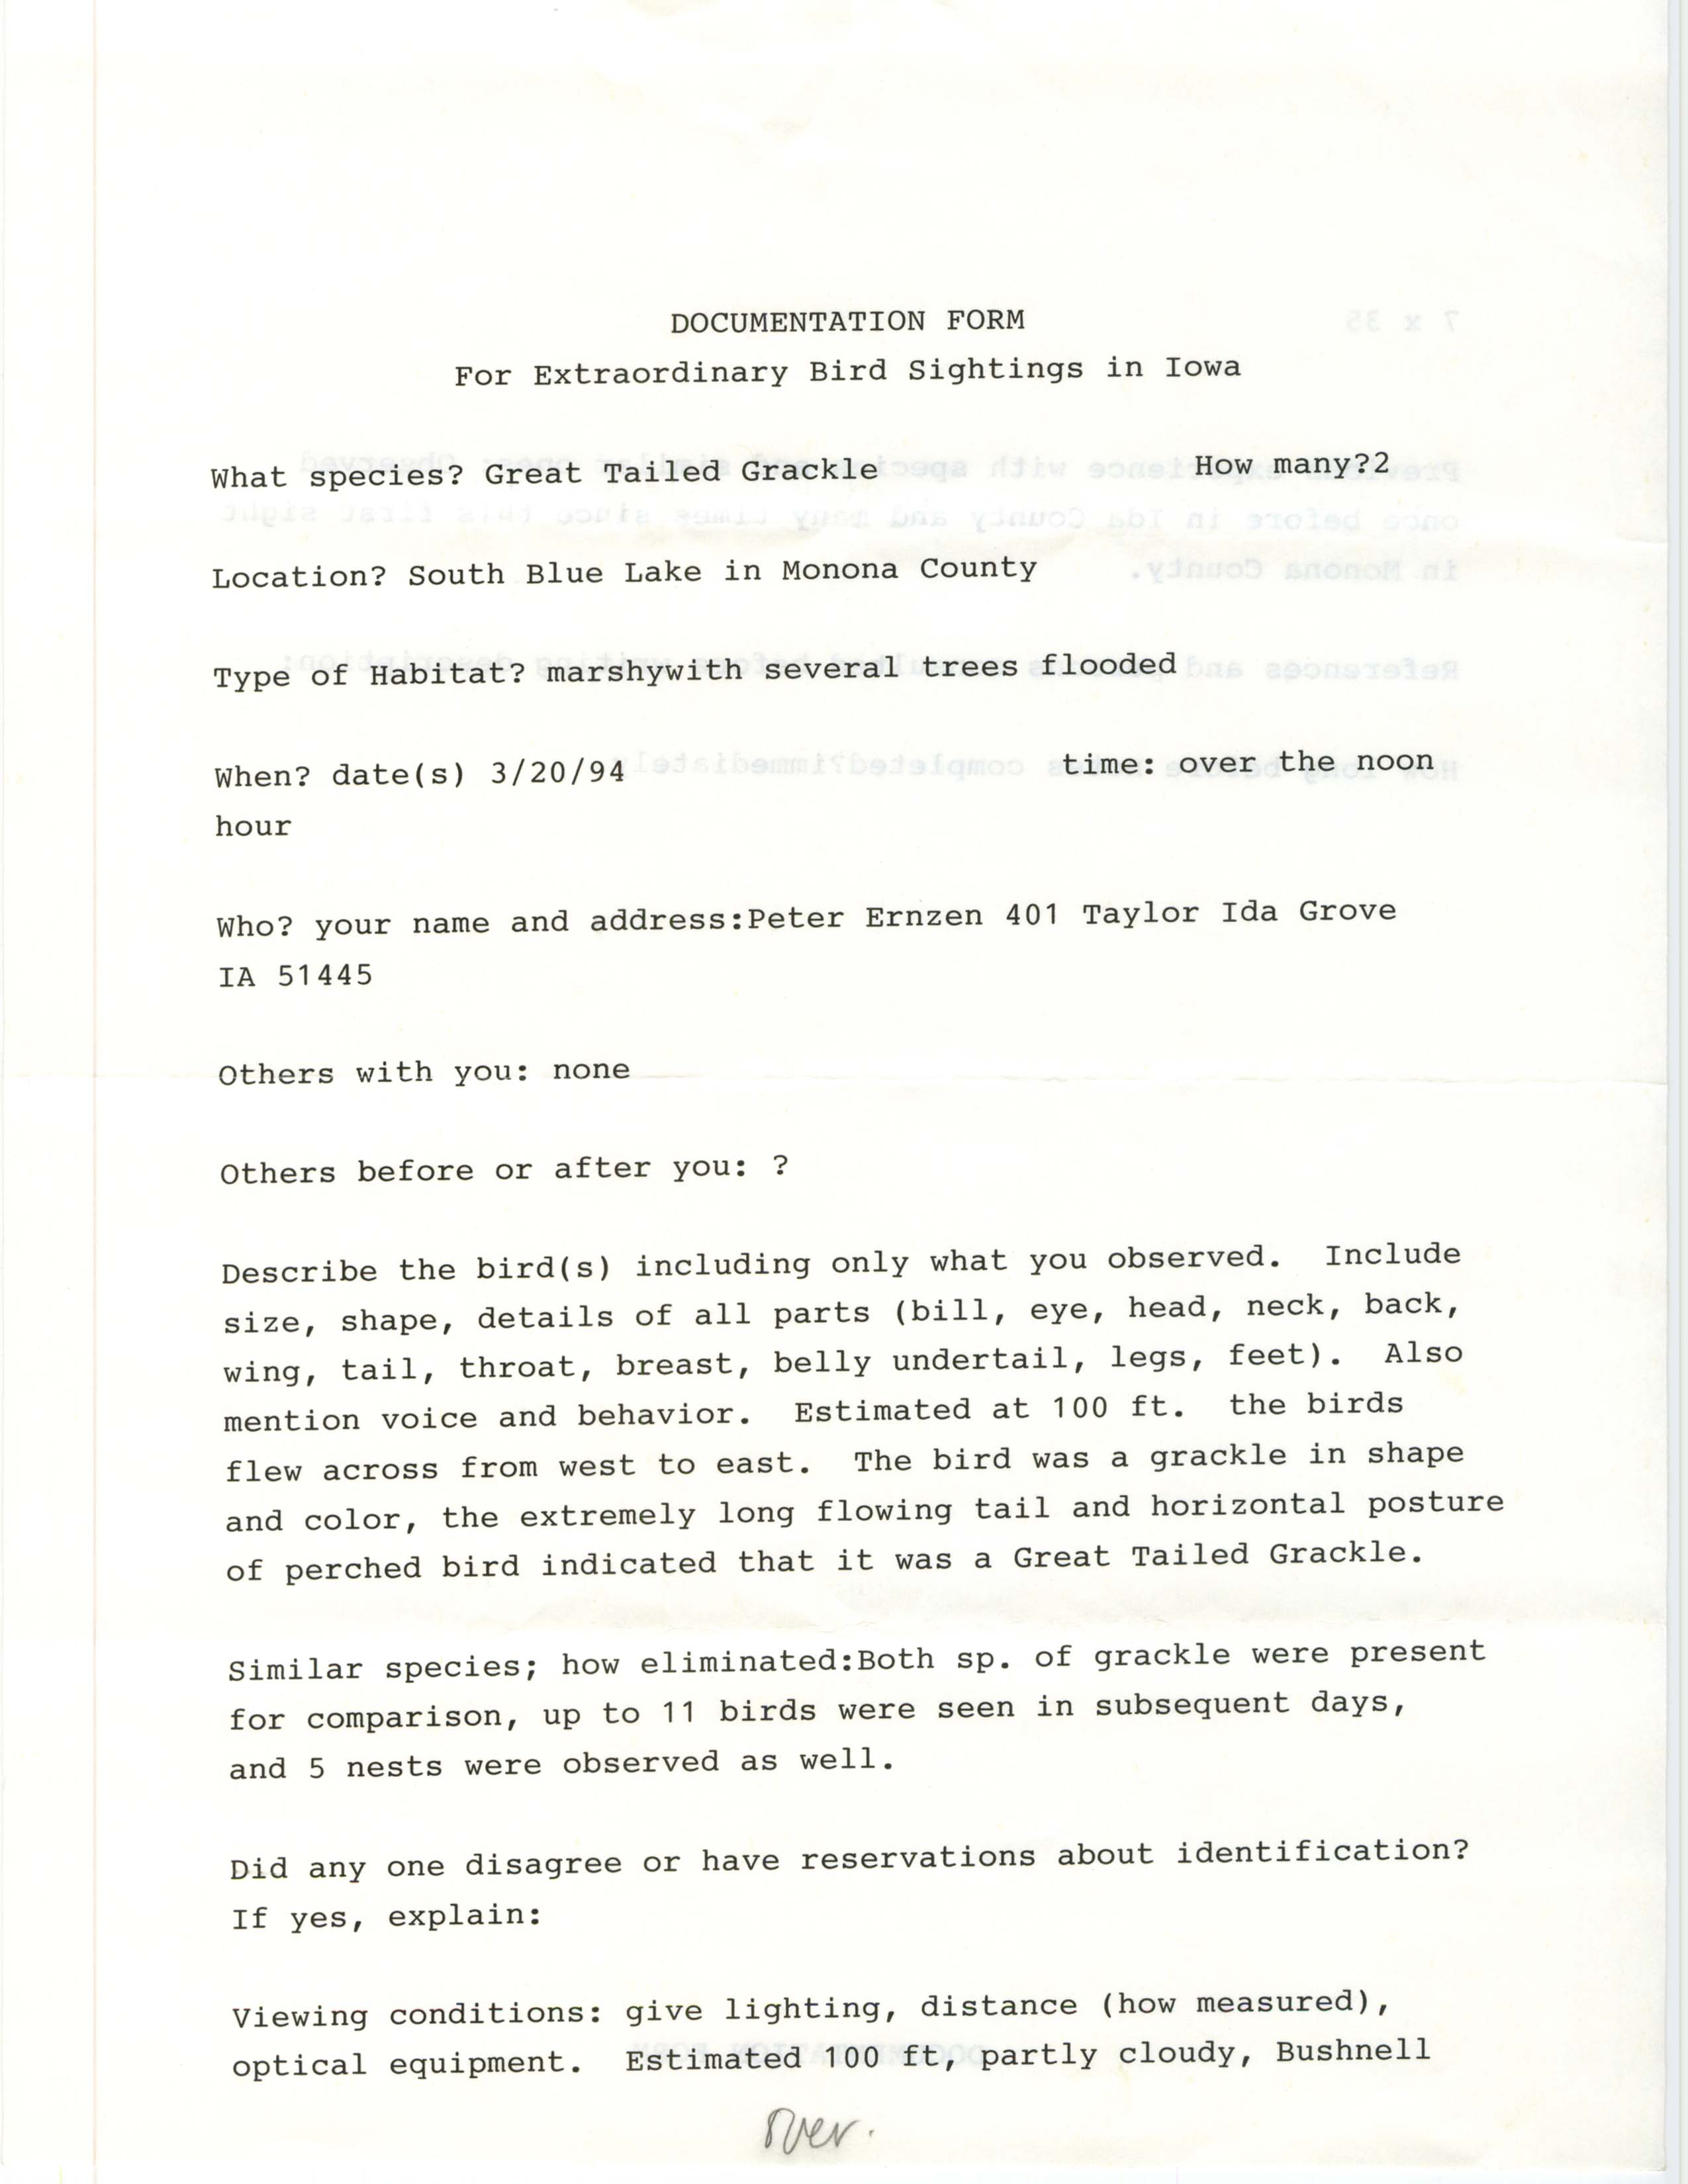 Rare bird documentation form for Great-tailed Grackle at Blue Lake, 1994